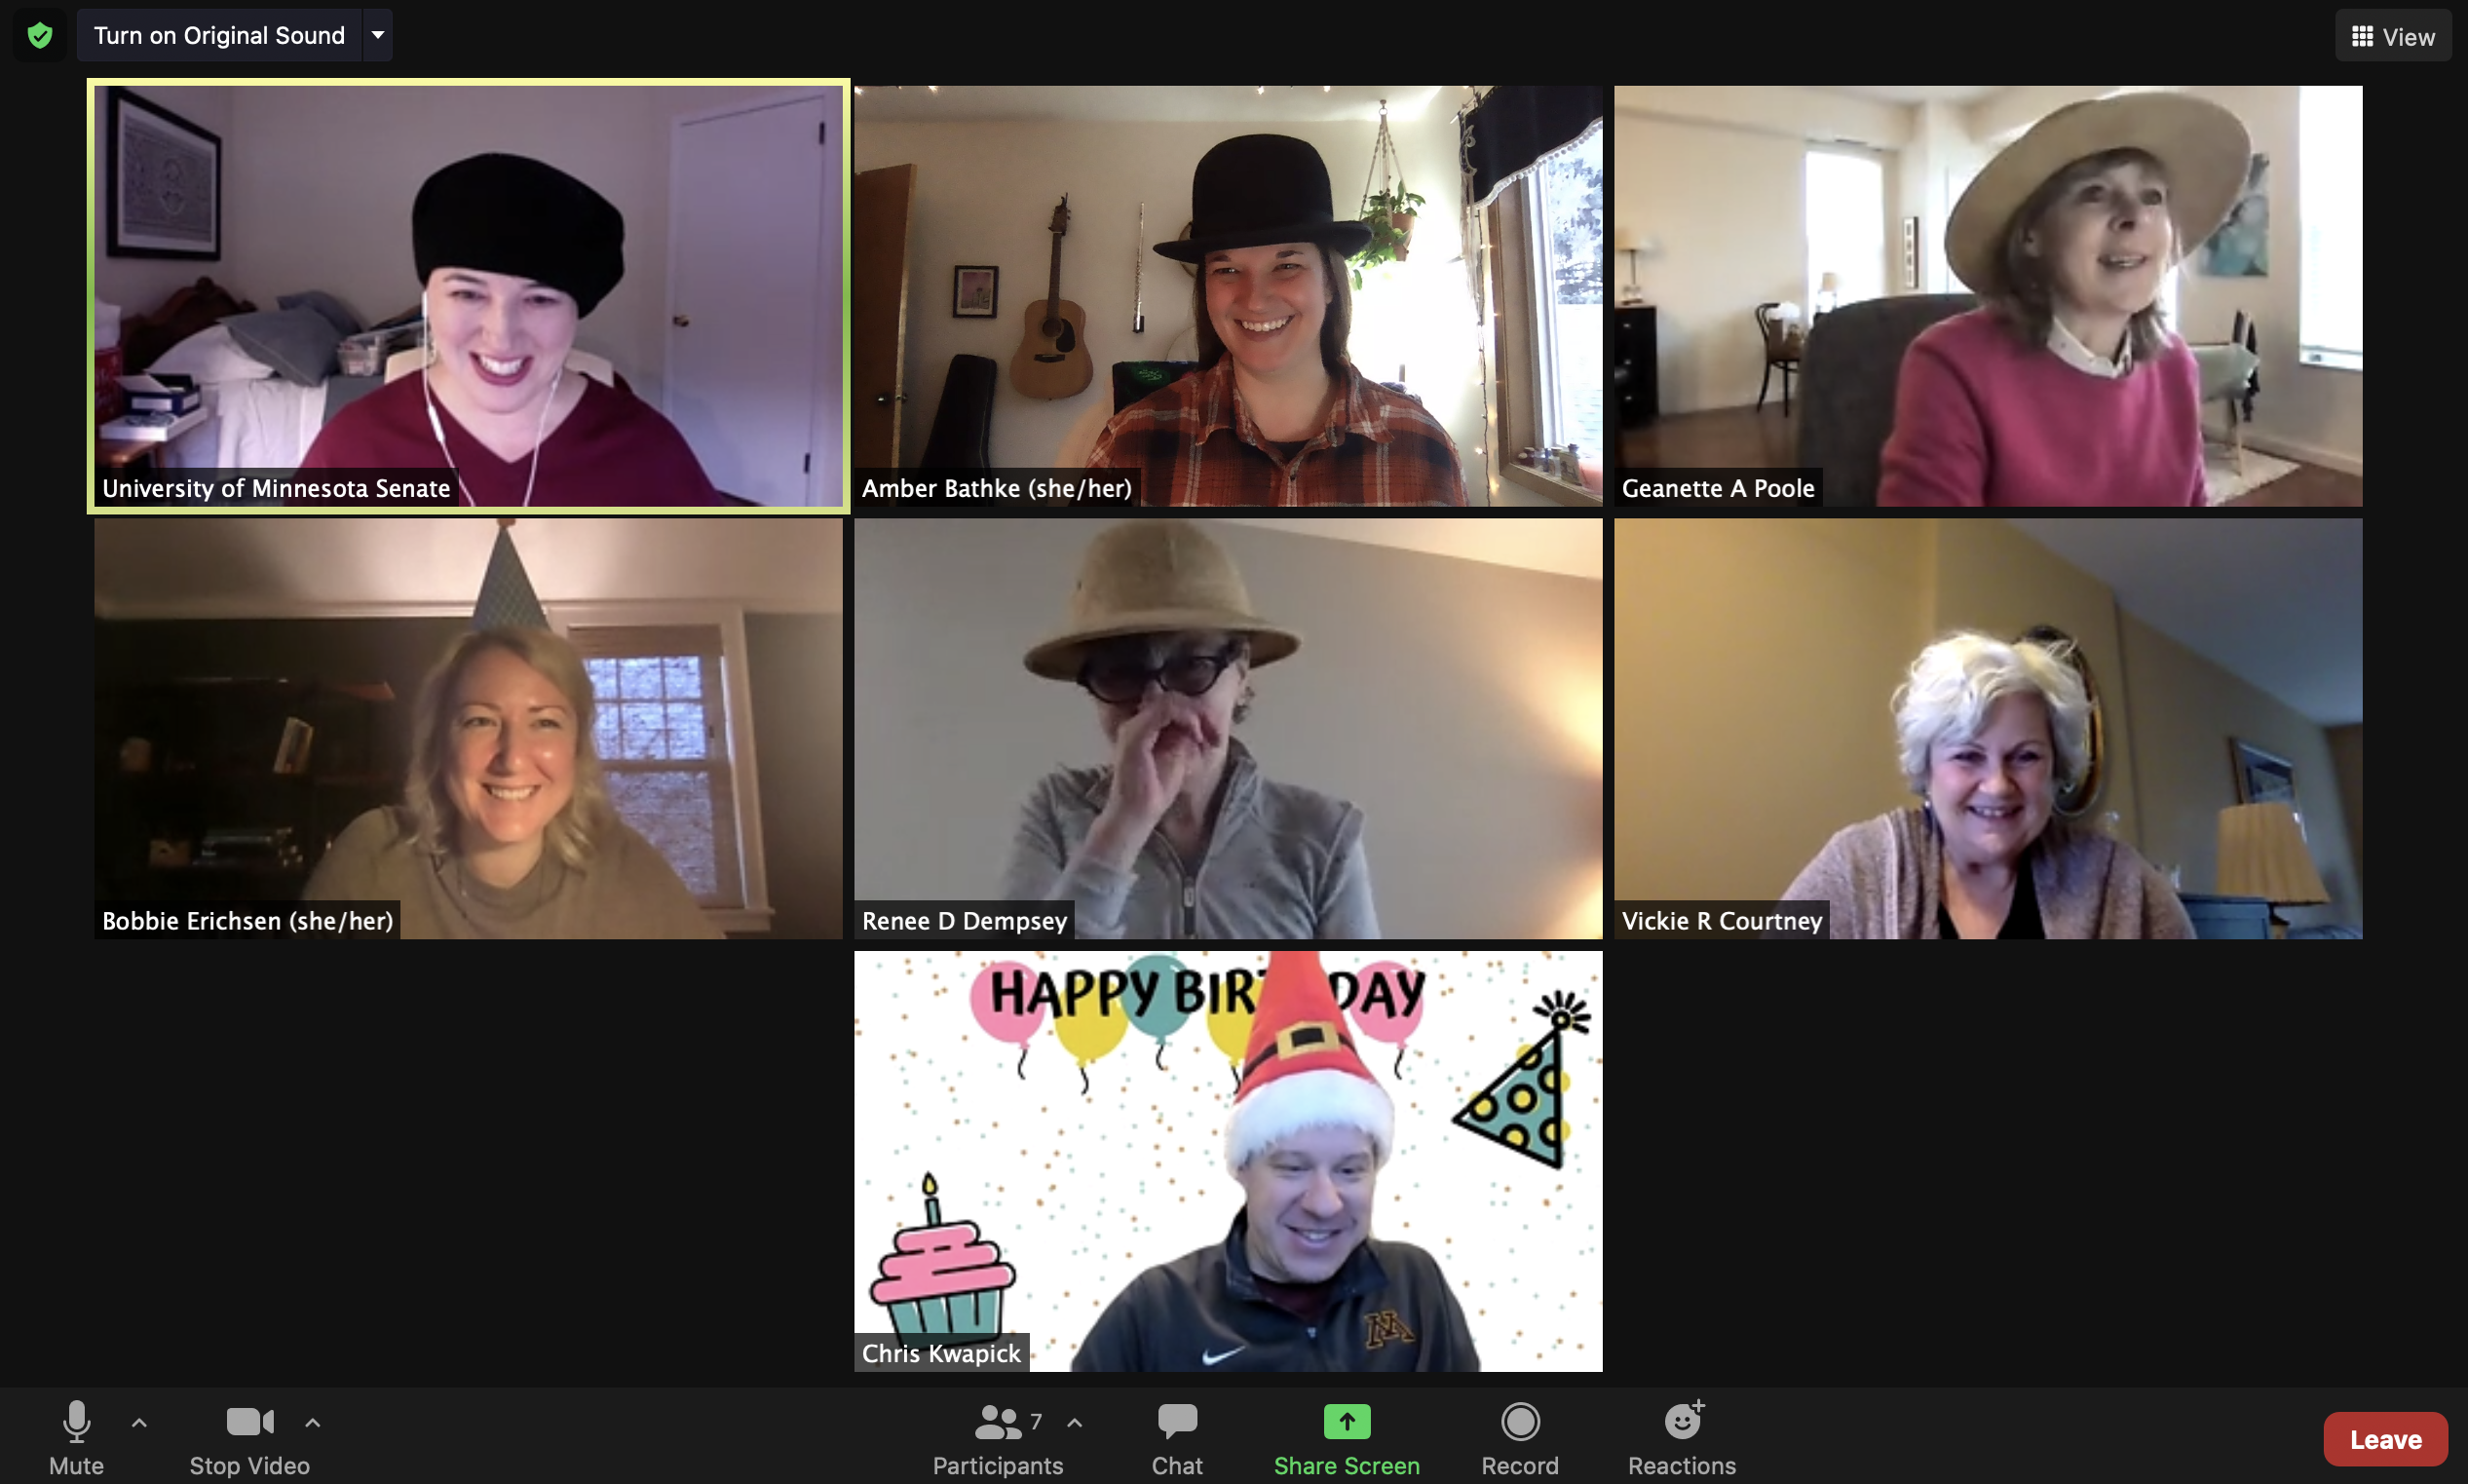 The 7 Senate Office staff members each in their own frame in a Zoom meeting. Each staff member is wearing a silly hat, and one has a background that reads \